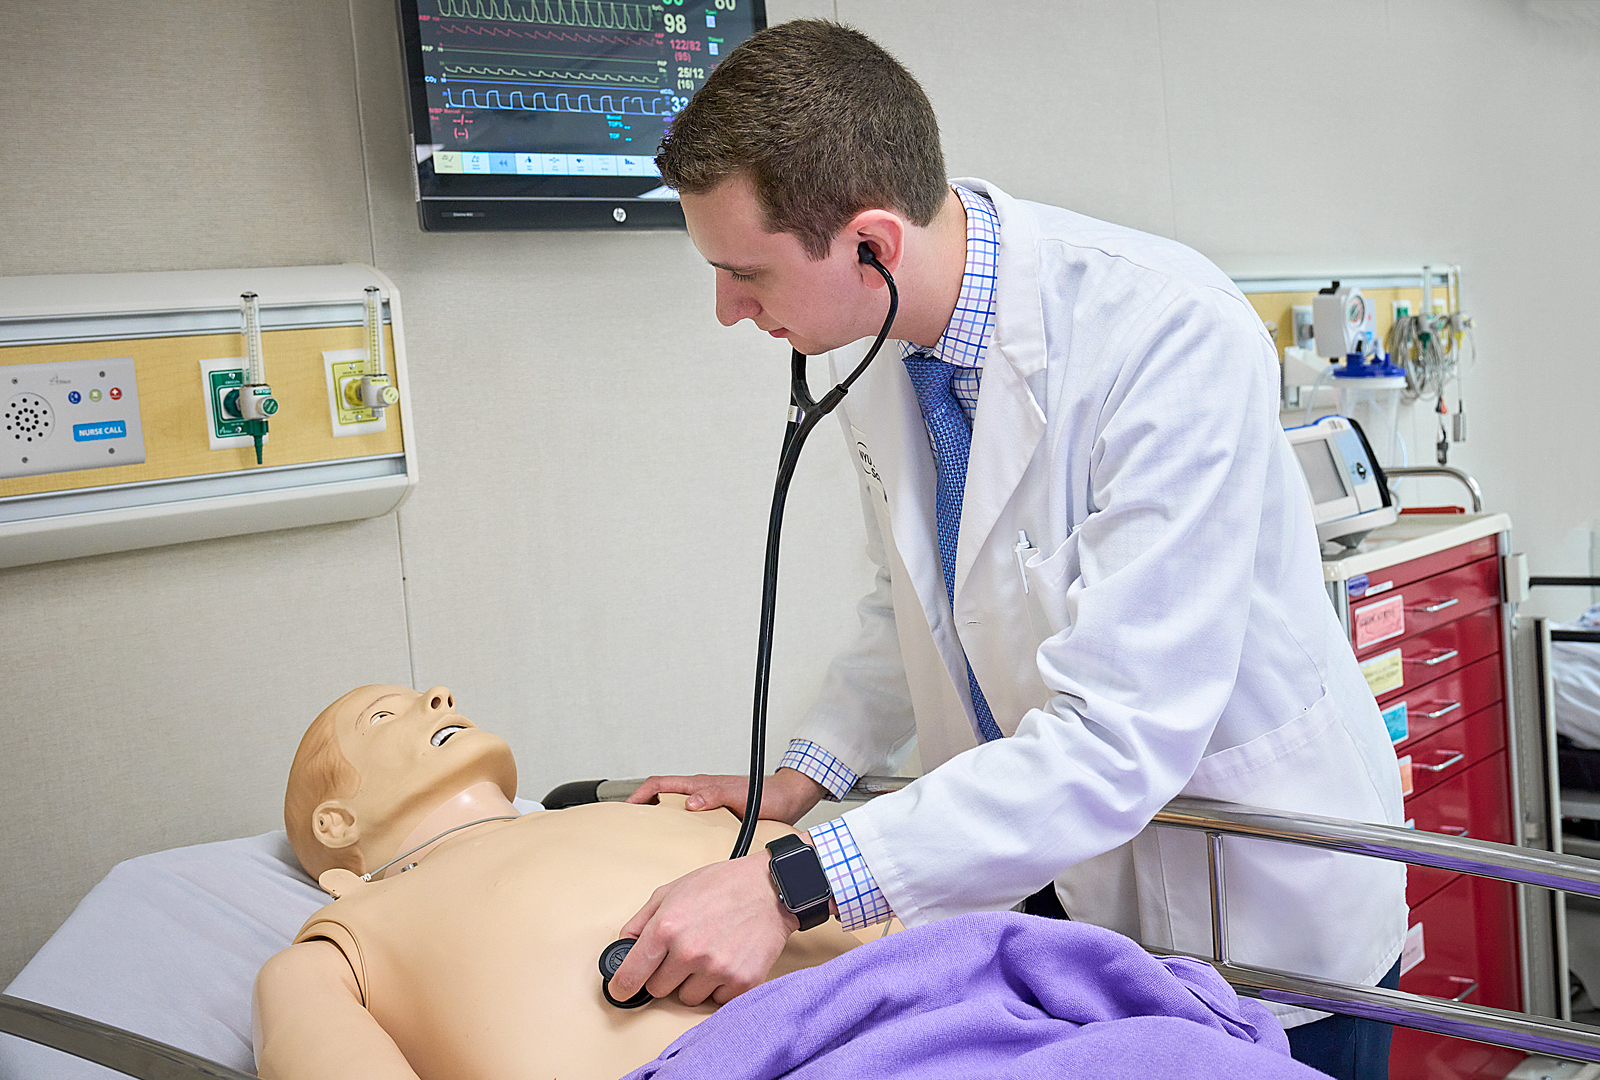 A medical student participates in patient simulation training using a medical manikin.